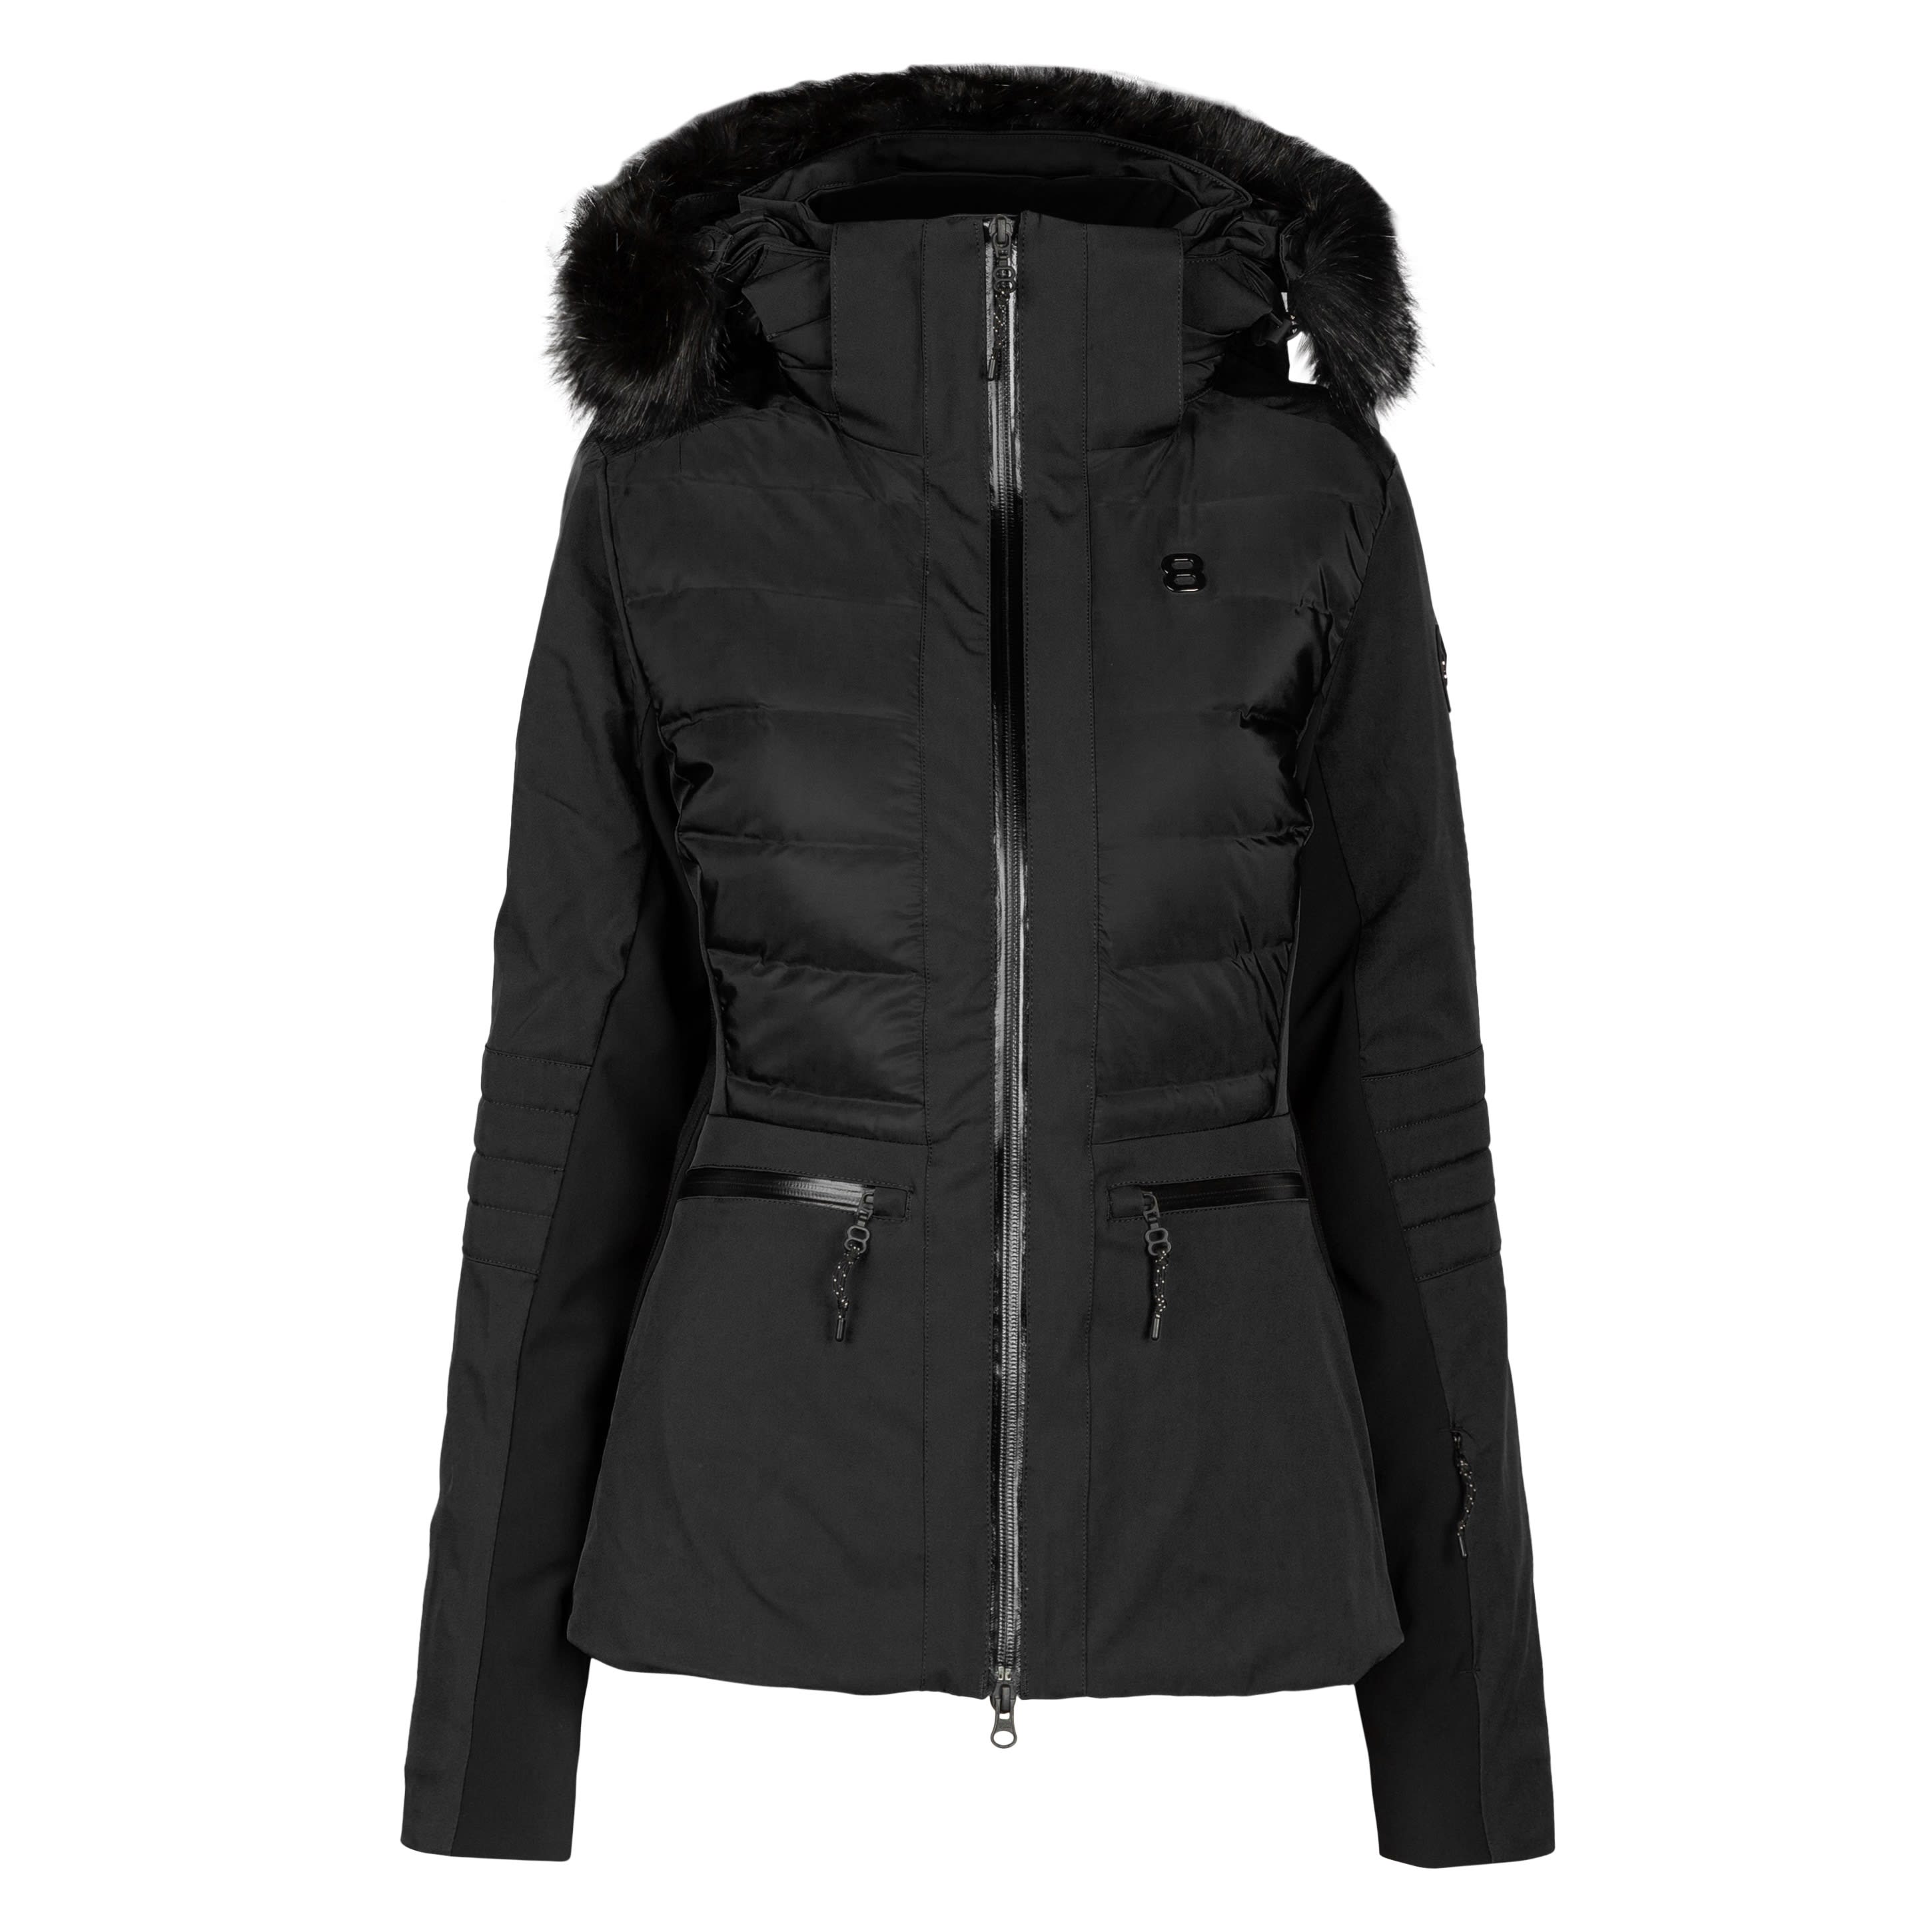 Buy 8848 Altitude Cristal Jacket from Outnorth